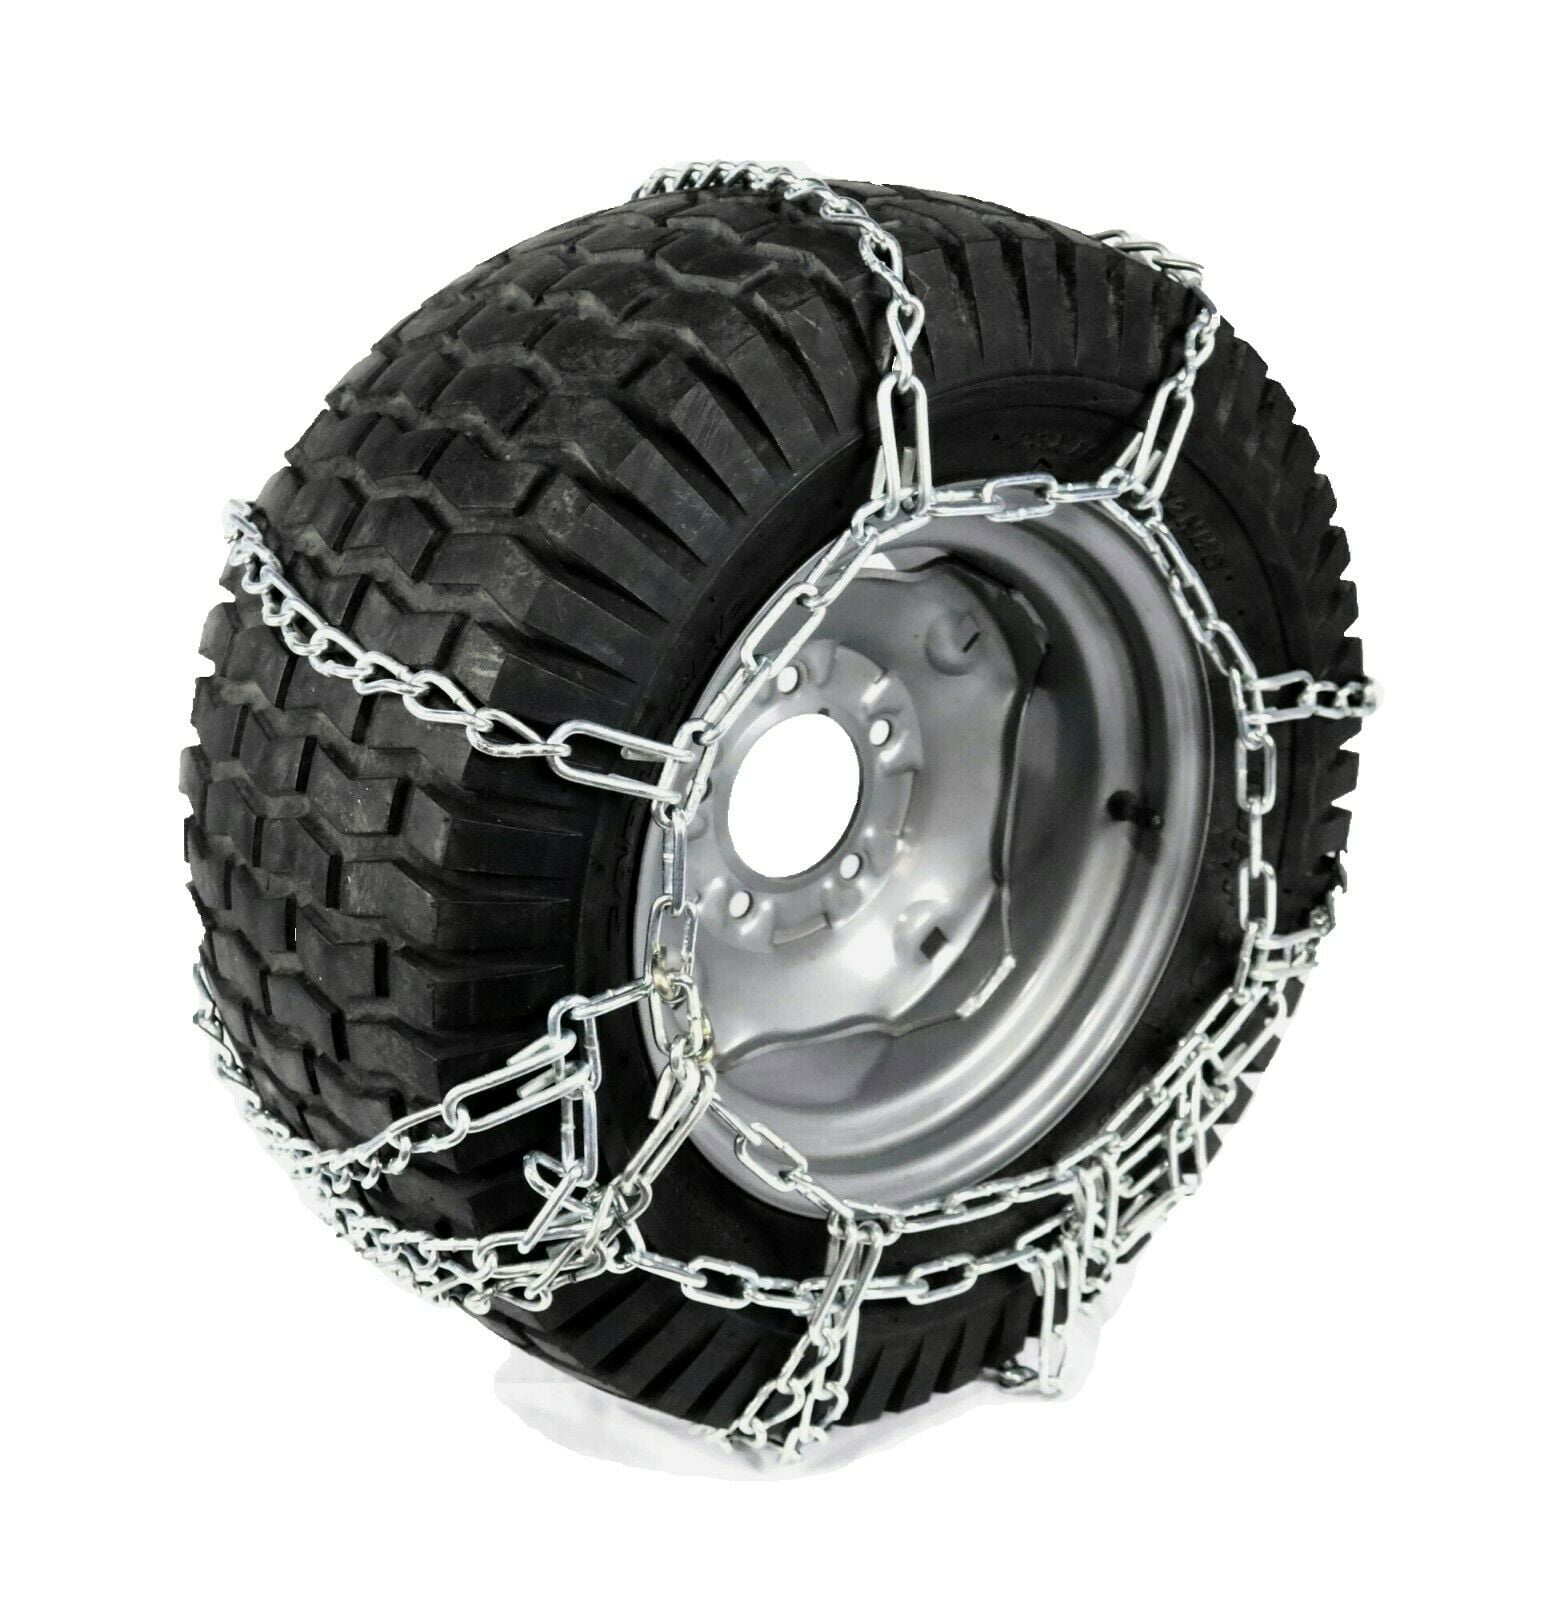 The ROP Shop Pair 2 Link TIRE Chains 20x8.00x10 for Sears Craftsman Lawn Mower Tractor Rider 